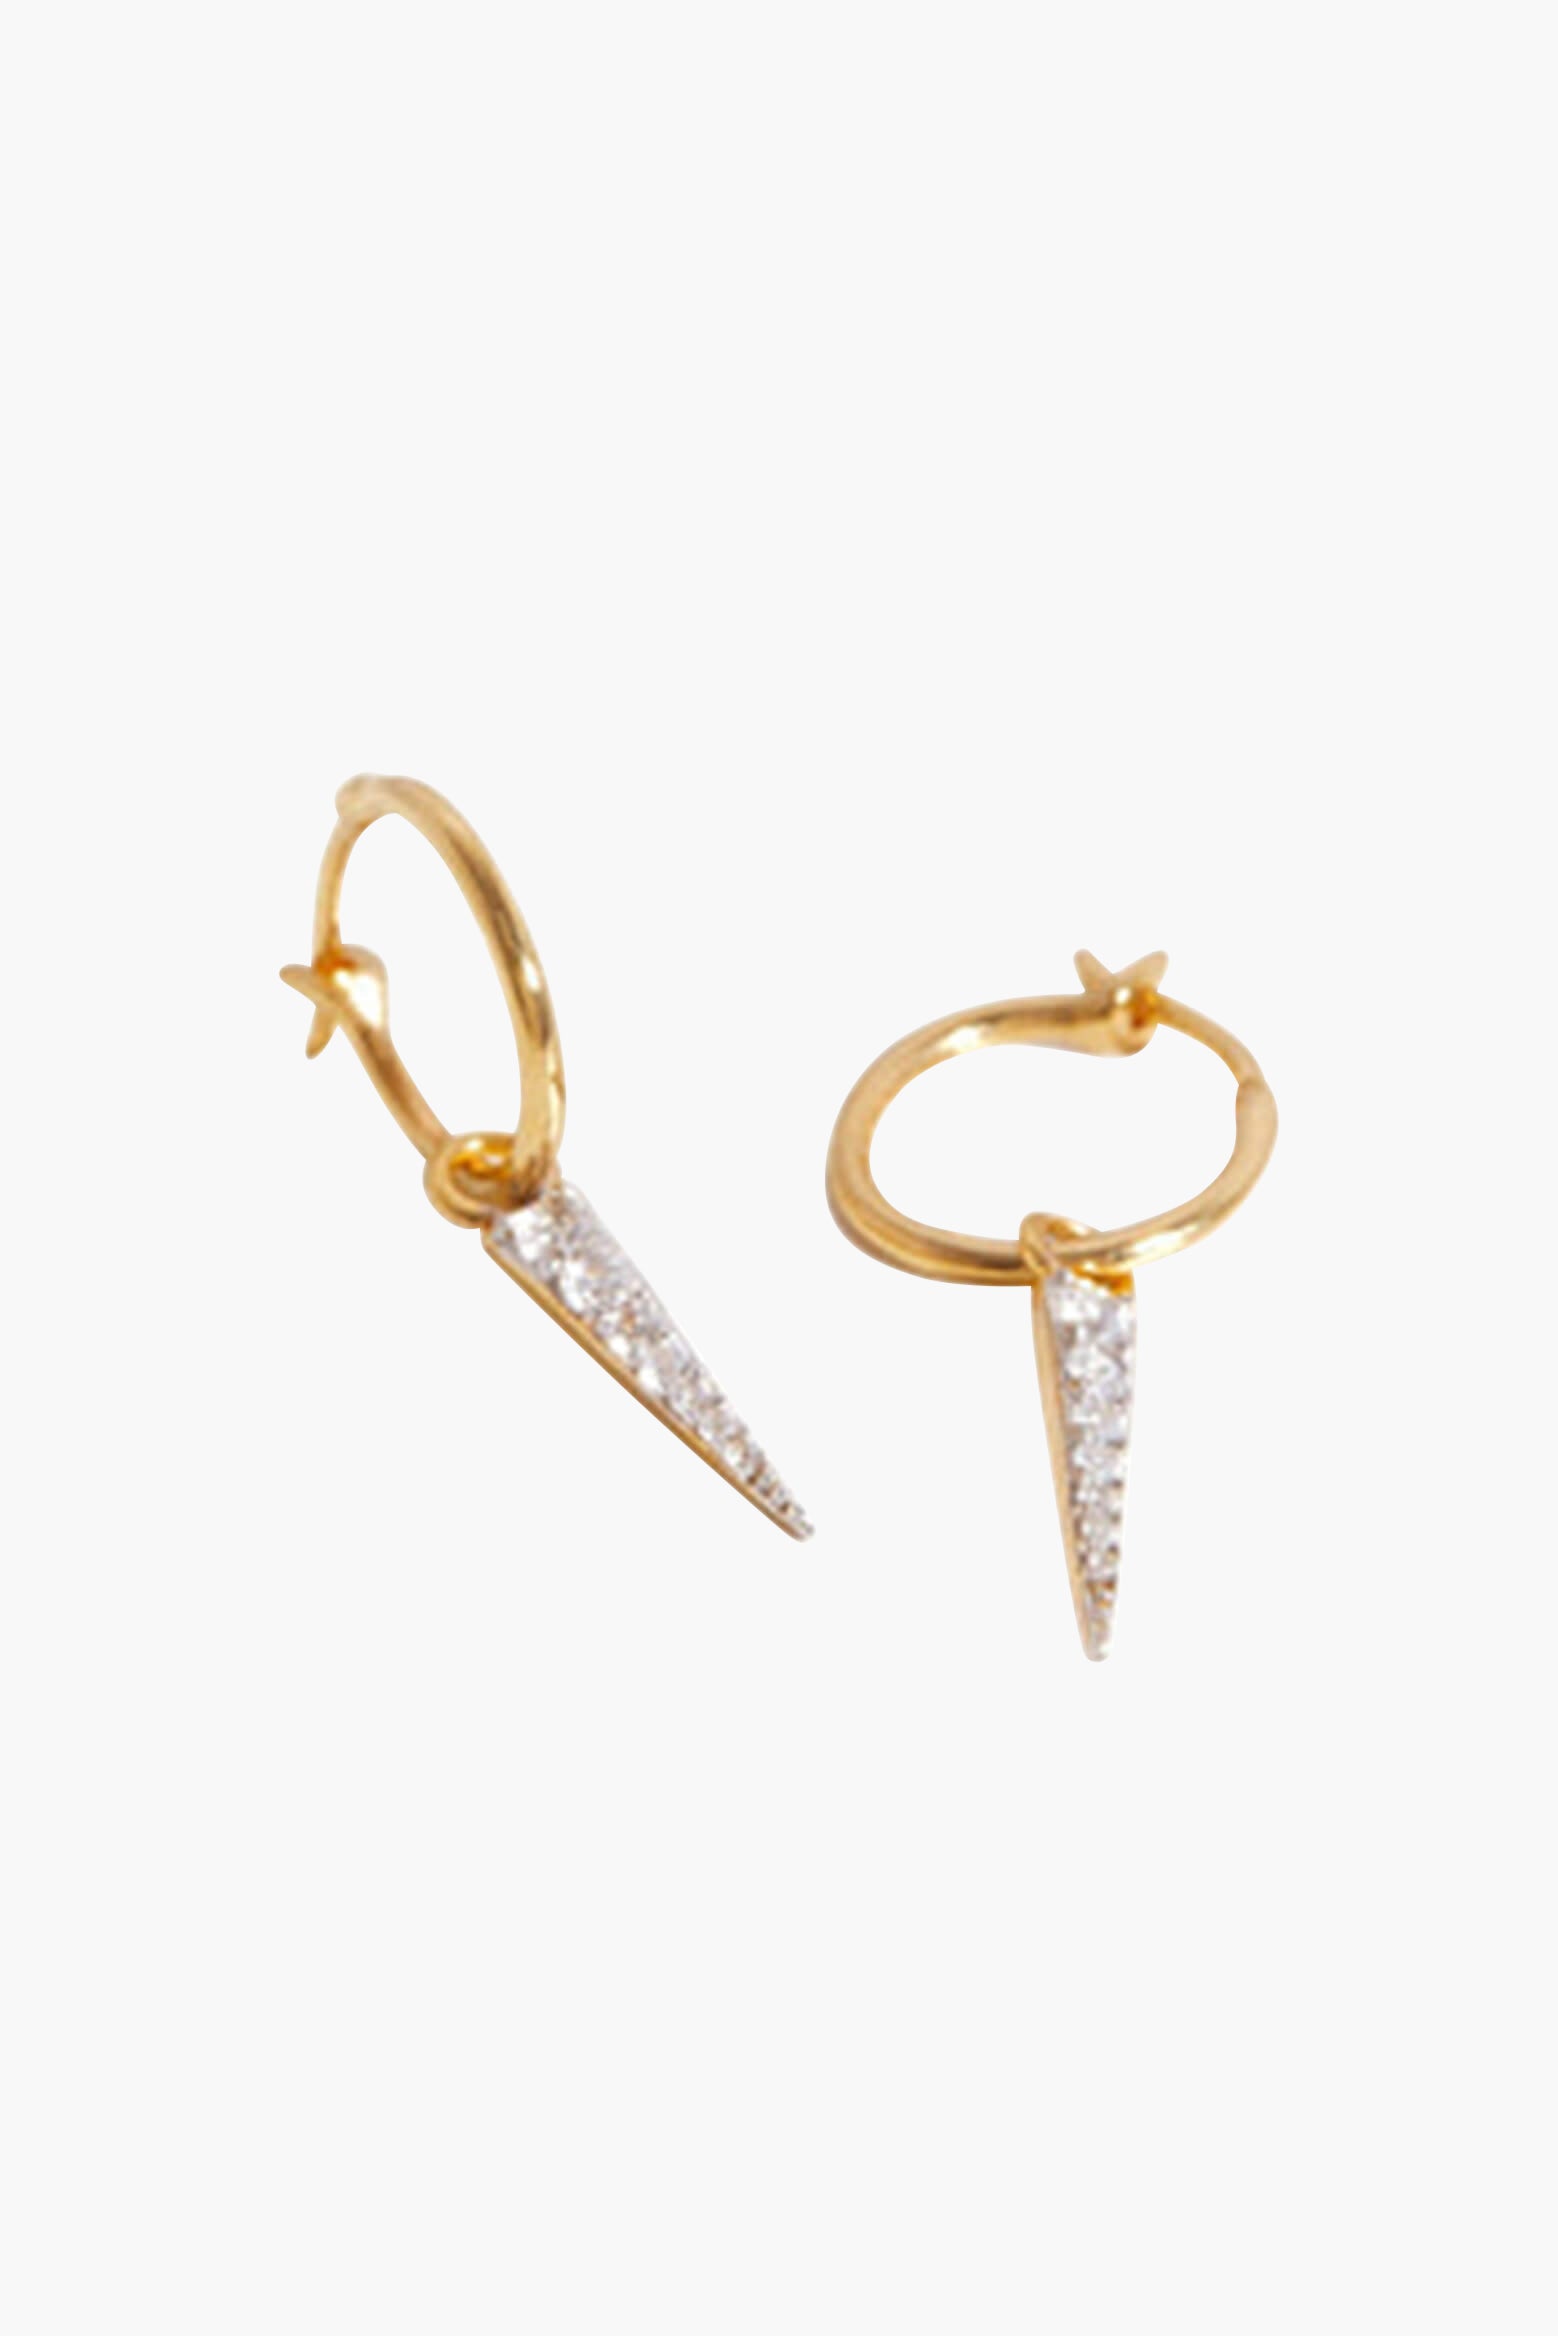 Missoma Mini Pave Spike Charm Hoops in Gold. Shop Missoma at The New Trend. Free Shipping over $300 AUD.